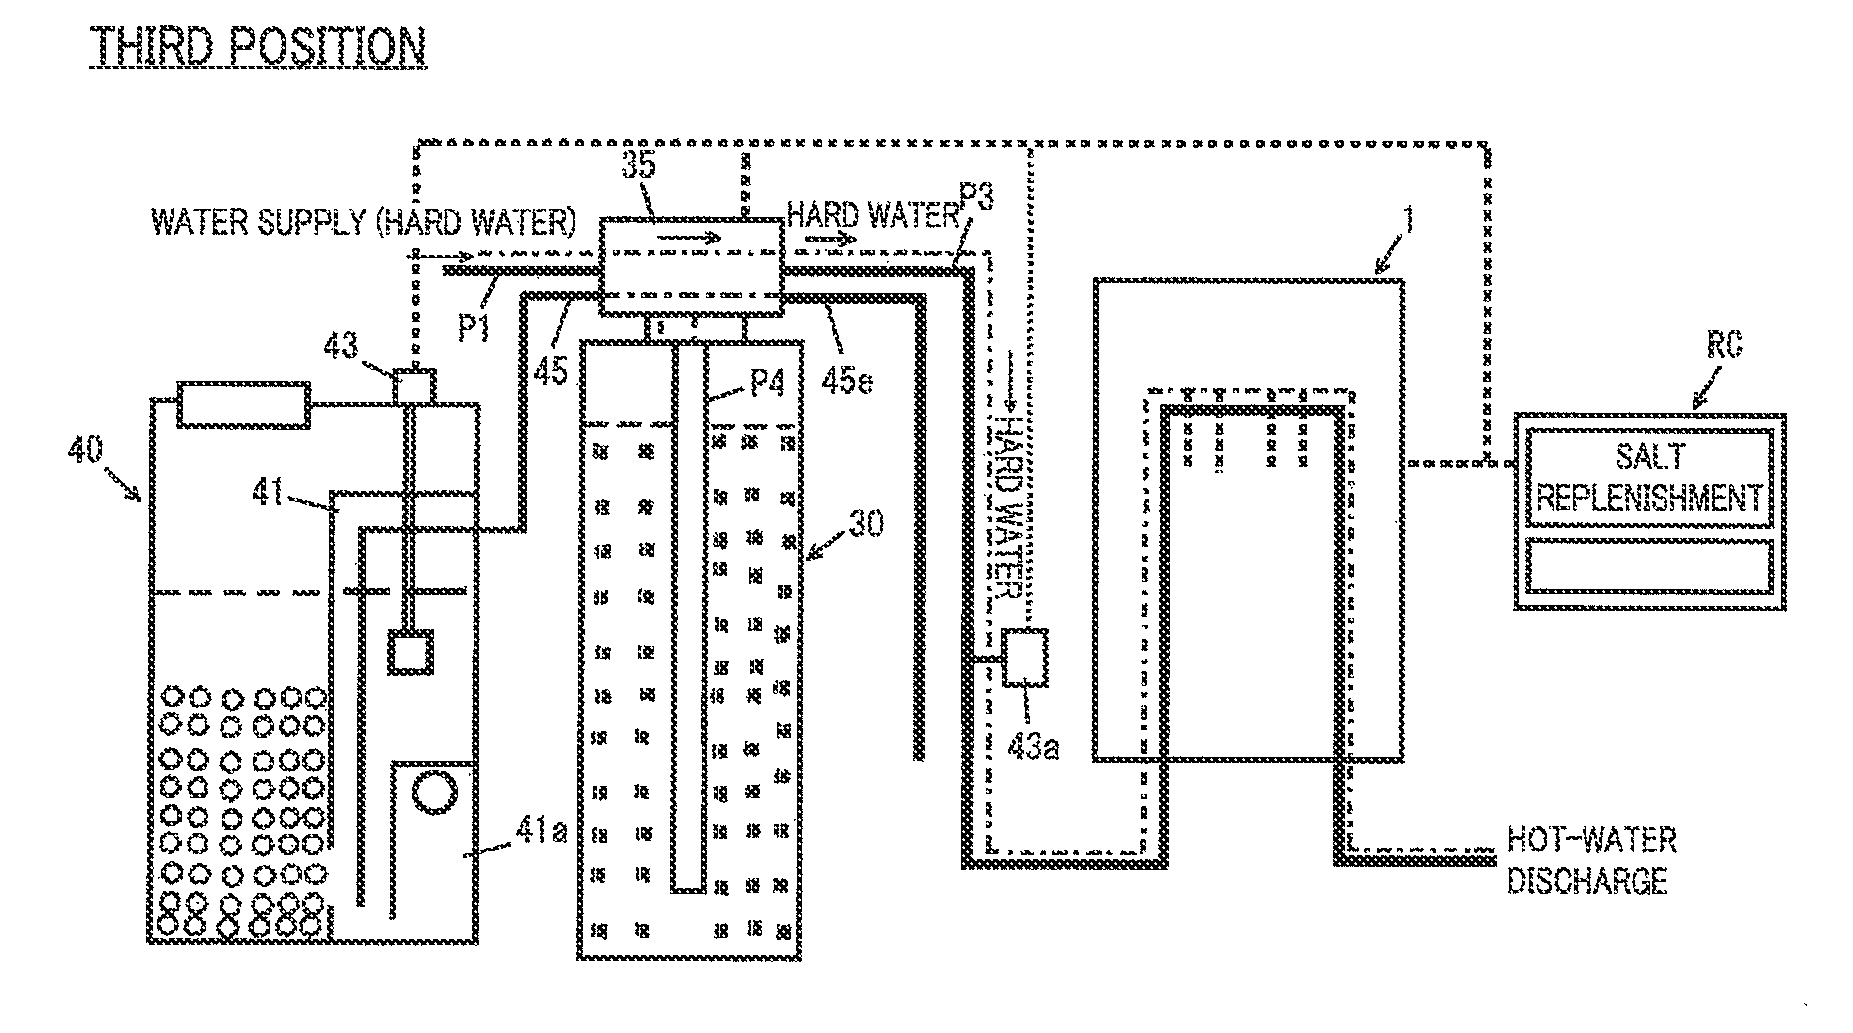 Hot-water supply system